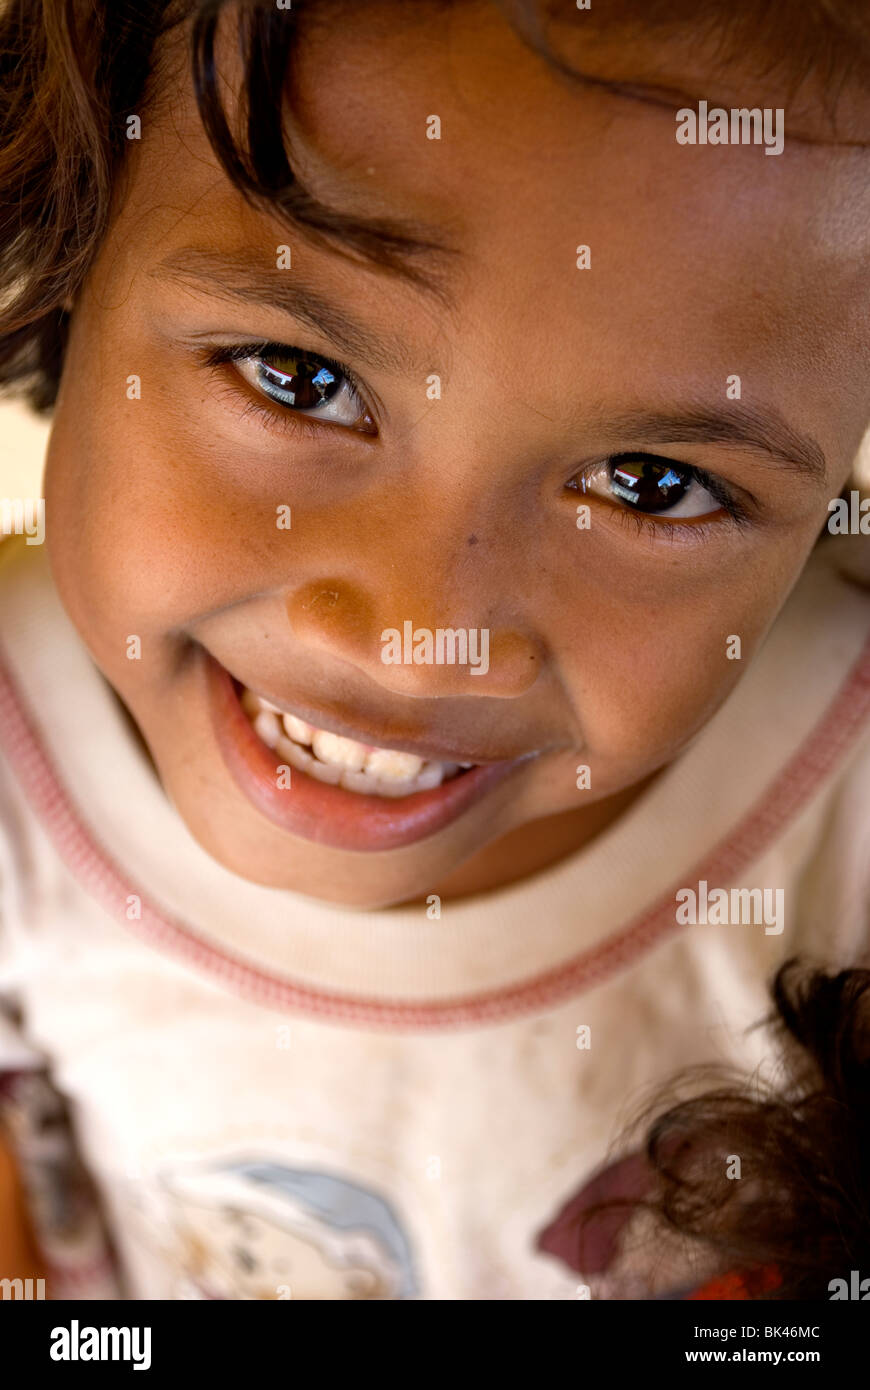 girl in kupang, west timor, indonesia Stock Photo